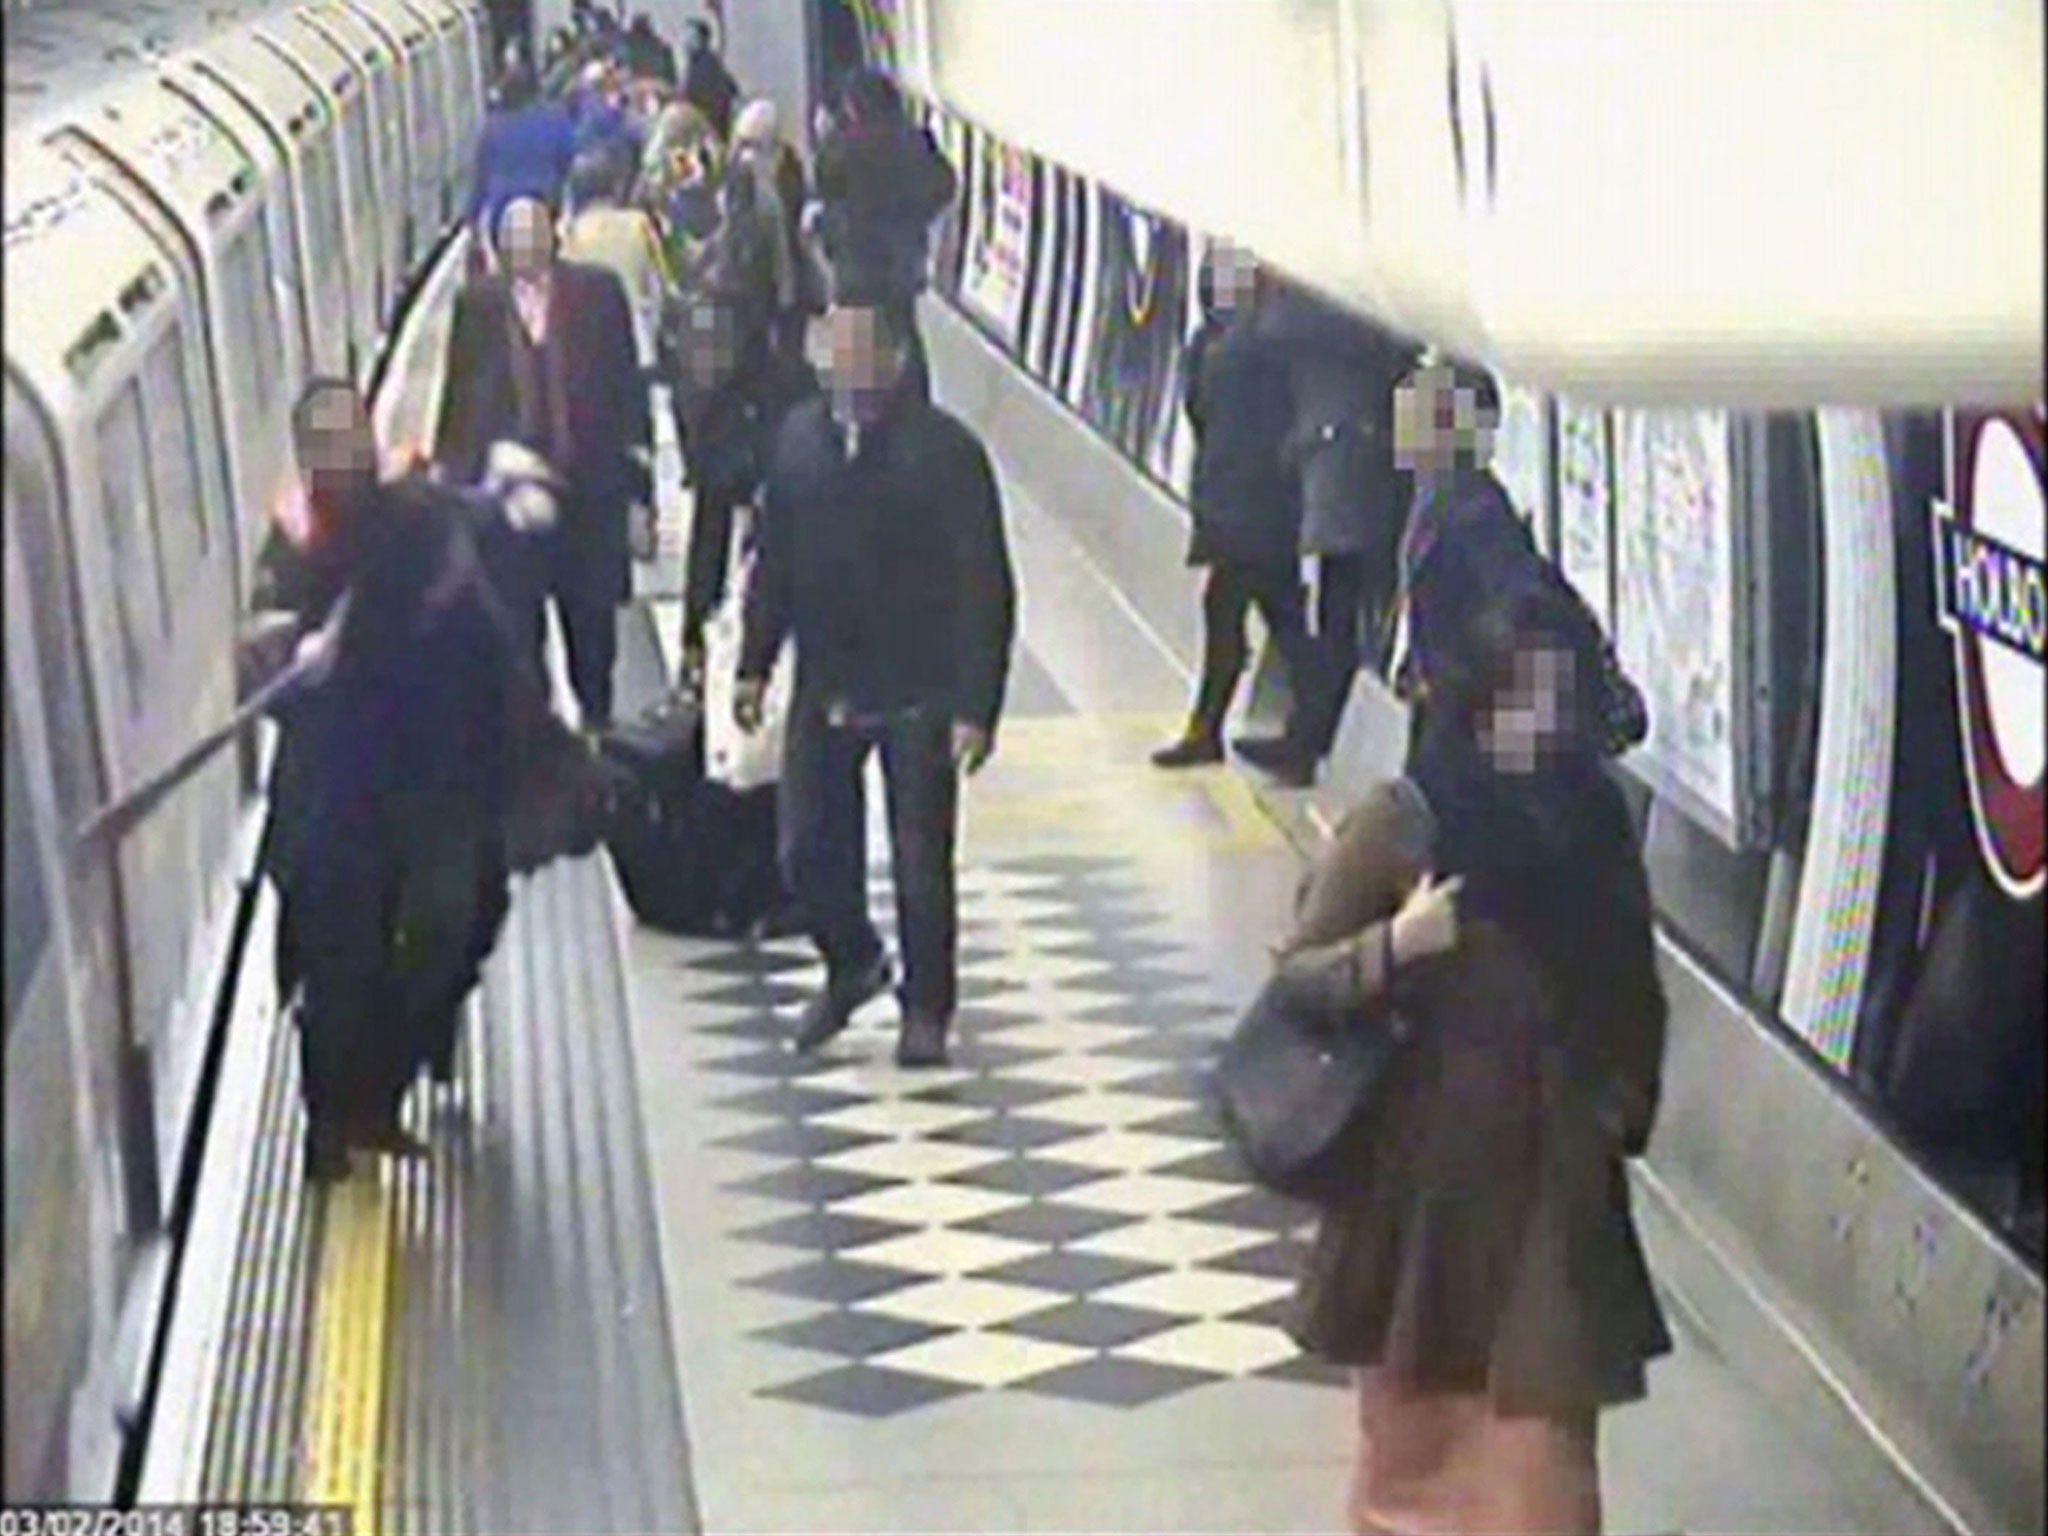 A passenger and their scarf which was trapped in tube train doors, as the train departs from the platform